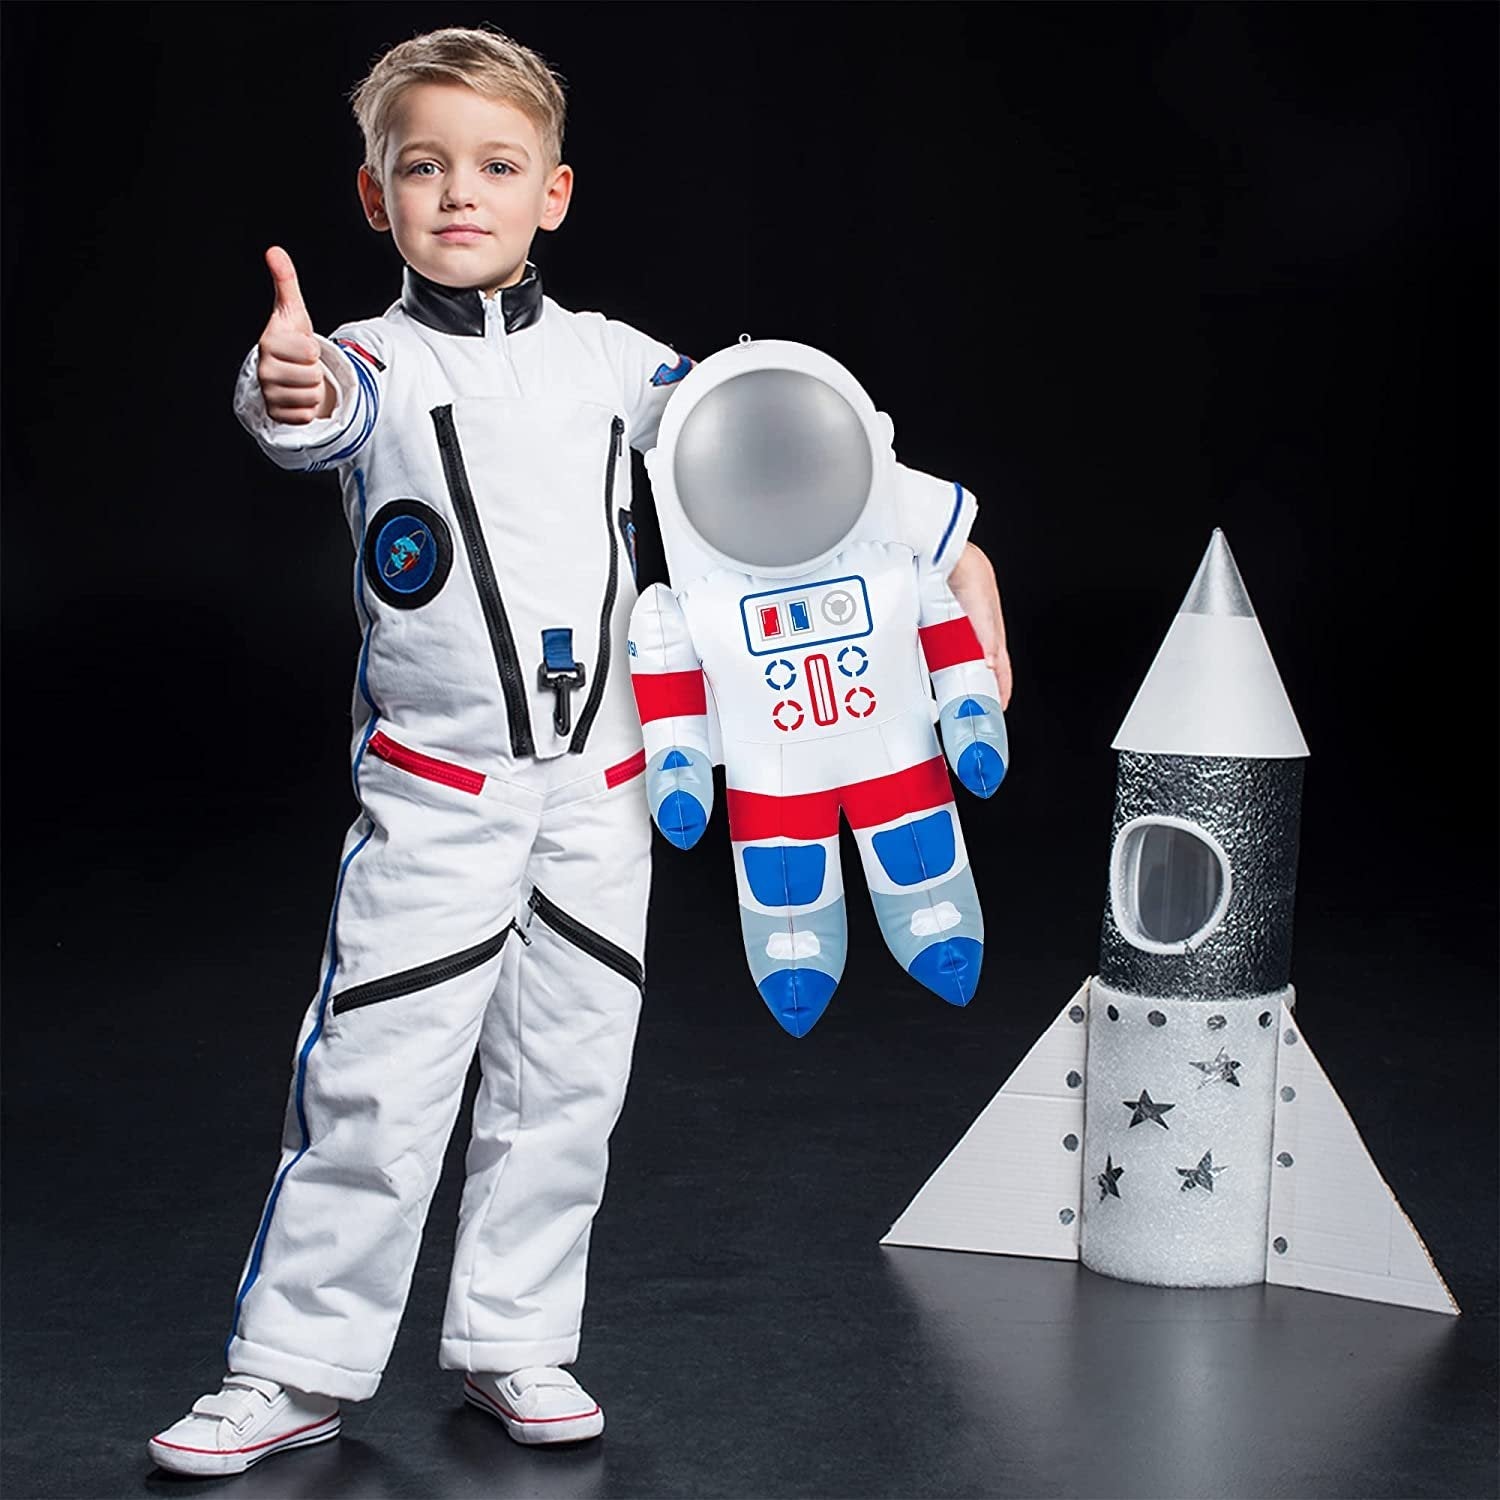 ArtCreativity Astronaut Inflates, Set of 2, Inflatable Astronaut Toys with Hanging Tag, Decorations for Outer Space Themed Parties, 22 Inch Long Party Inflates, Fun Pretend Play Accessories